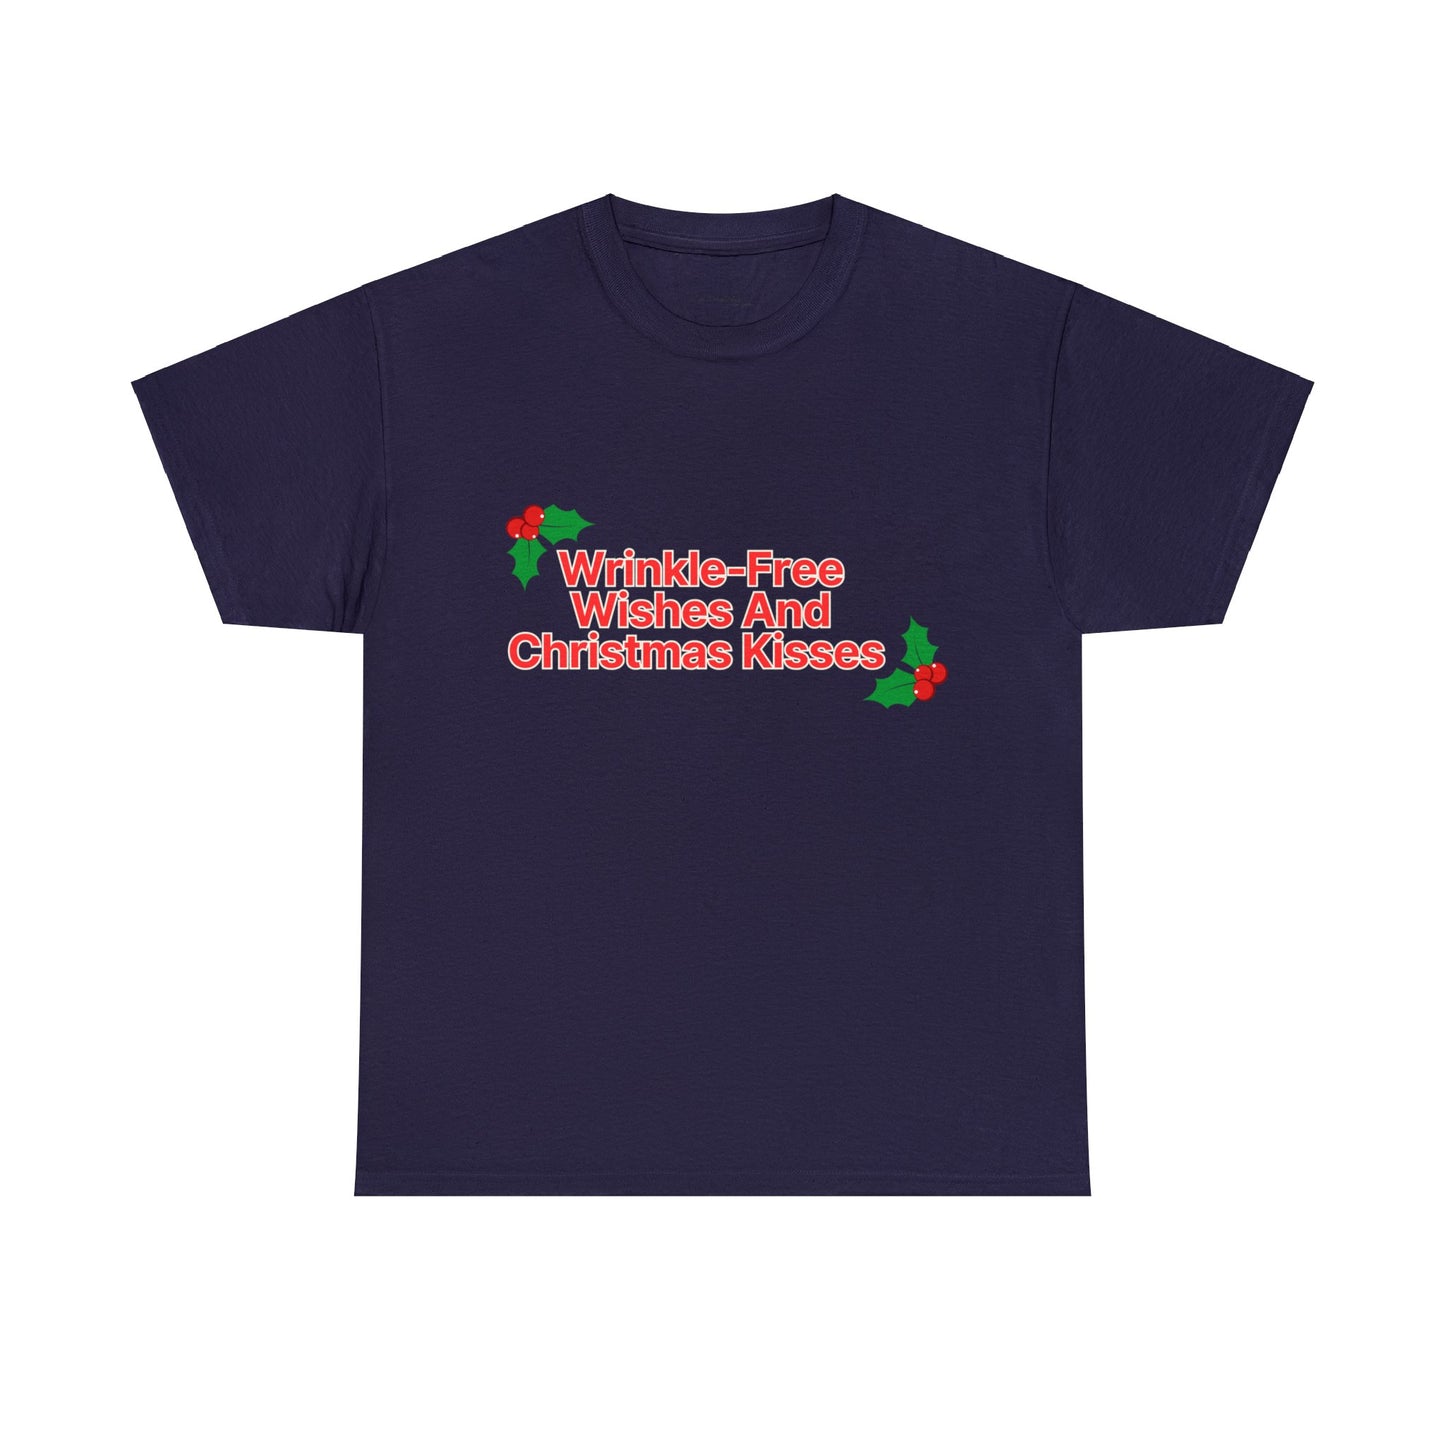 Wrinkle-Free Wishes T-Shirt